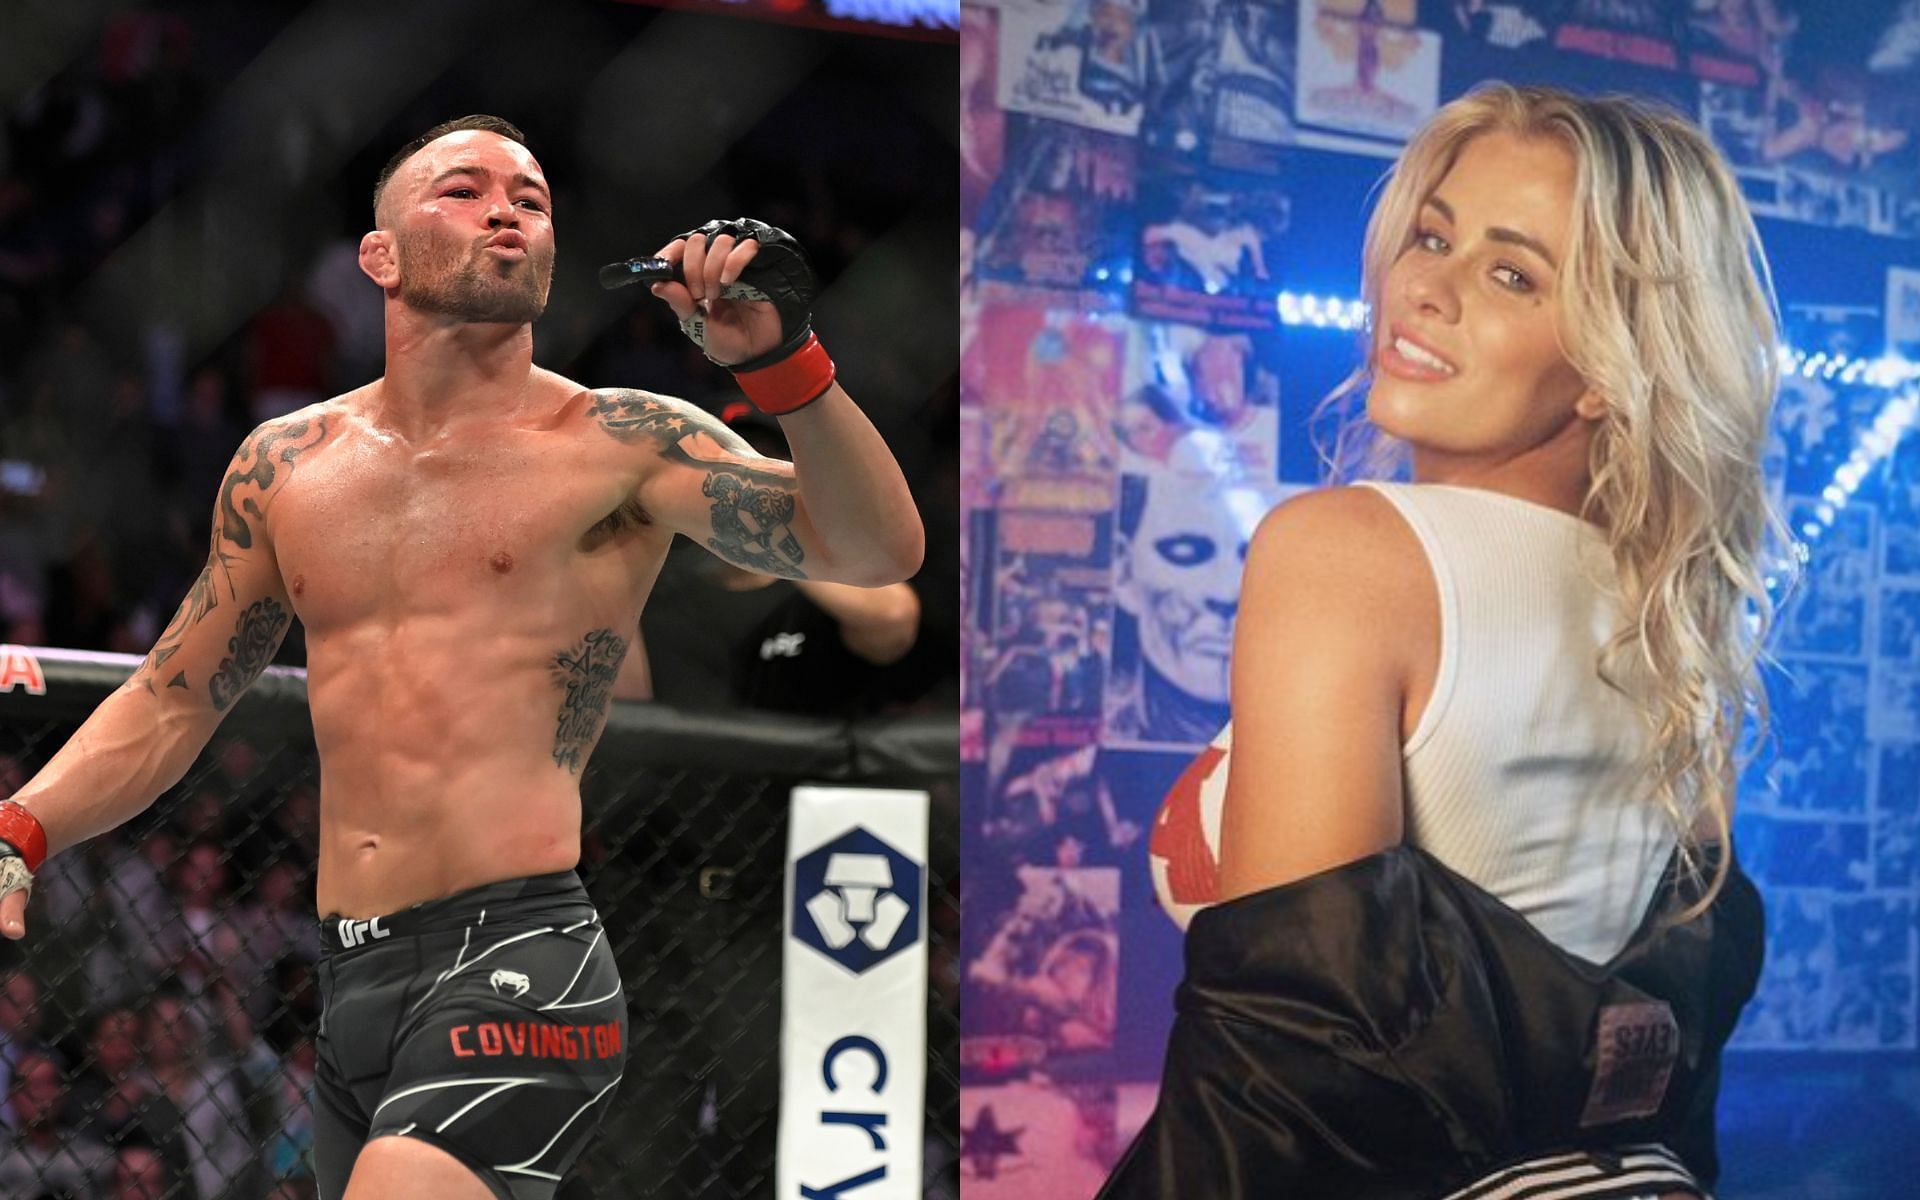 Colby Covington (left), Paige VanZant (right) [Image credits: Getty Images and @paigevanzant]